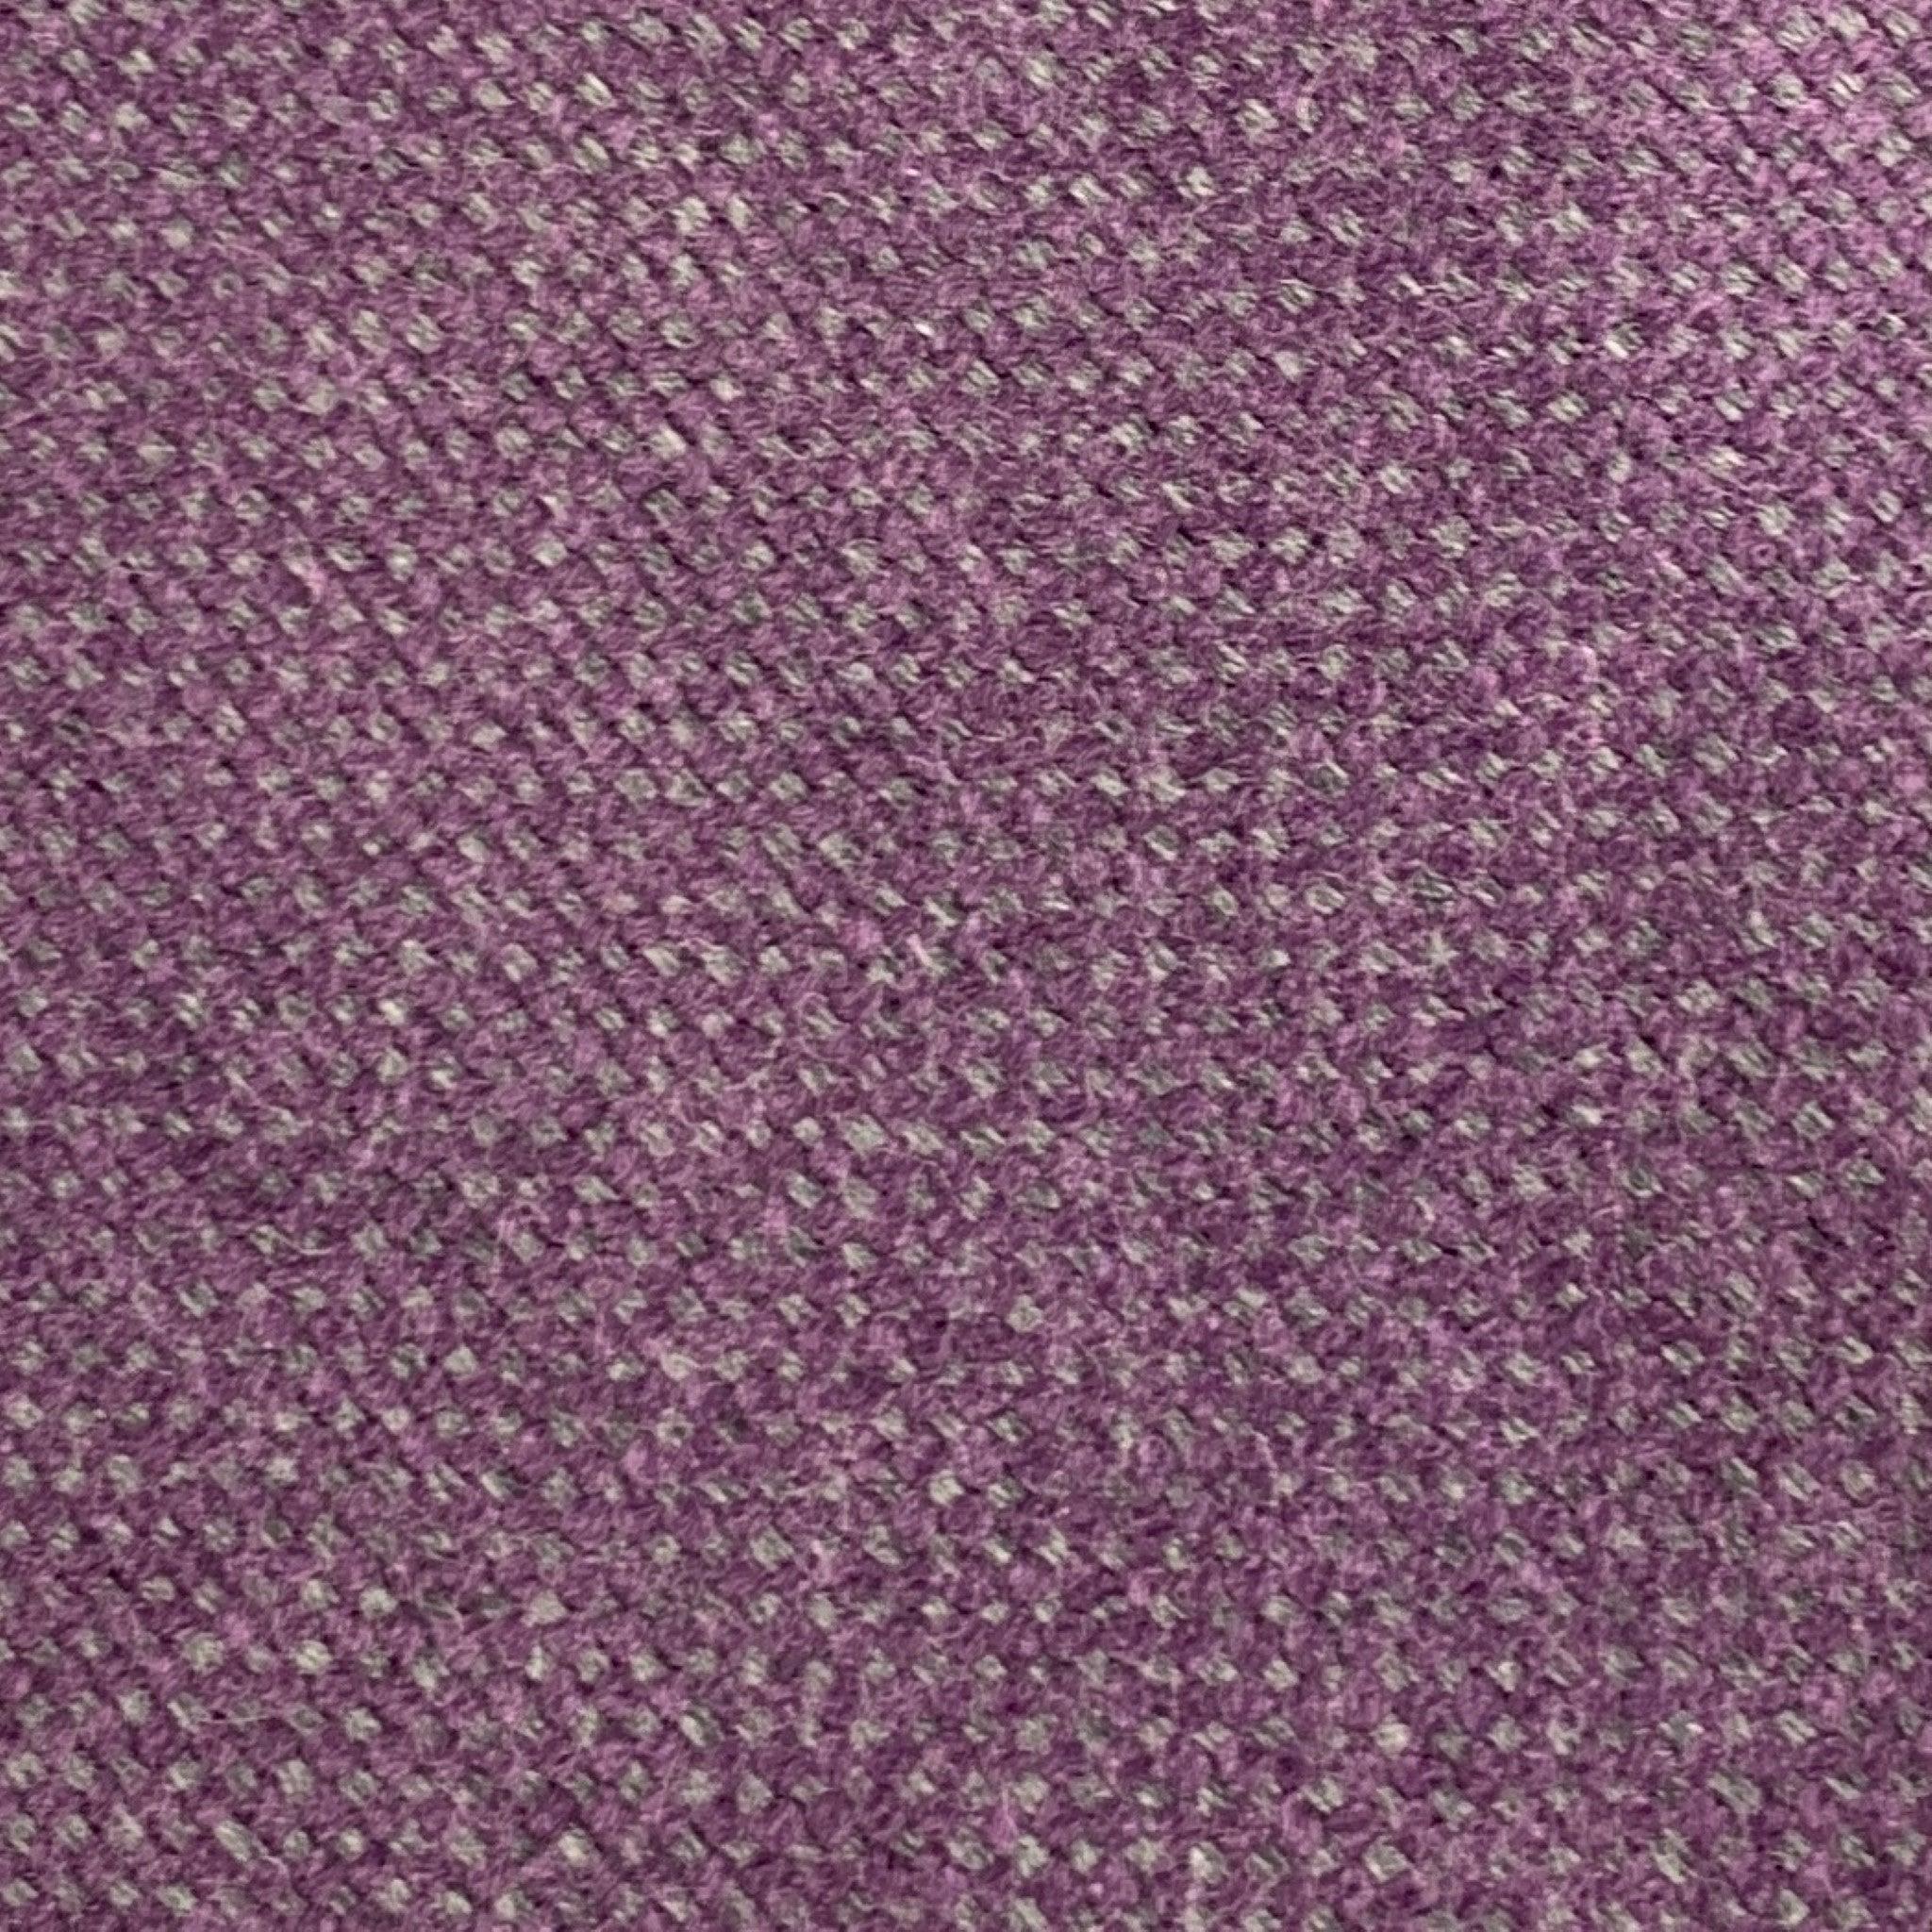 LUCIANO BARBERA Purple Grey Wool Tie In Good Condition For Sale In San Francisco, CA